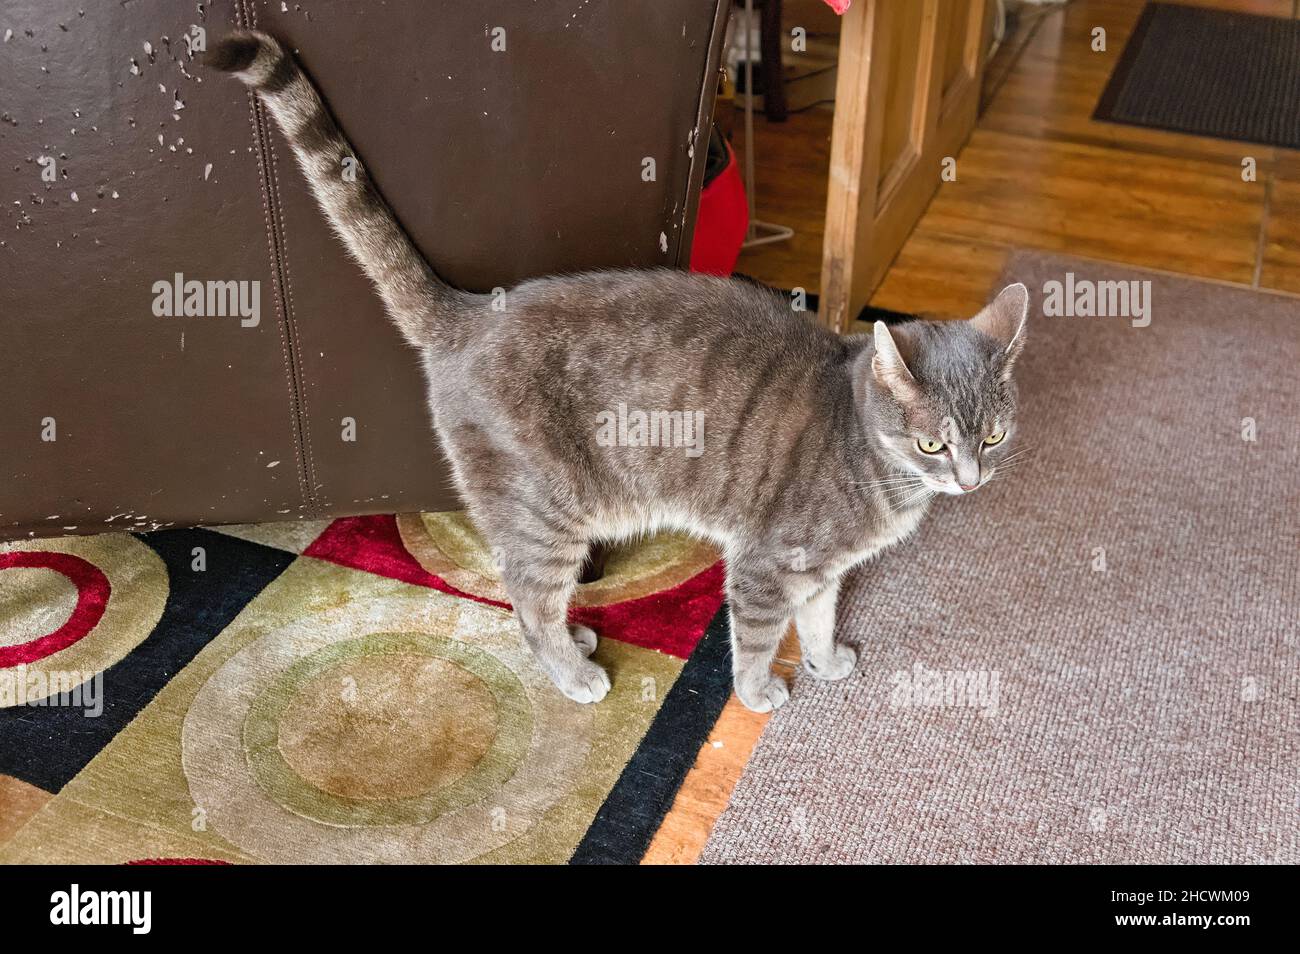 Shorthaired tabby cat with upright tail in the living room Stock Photo